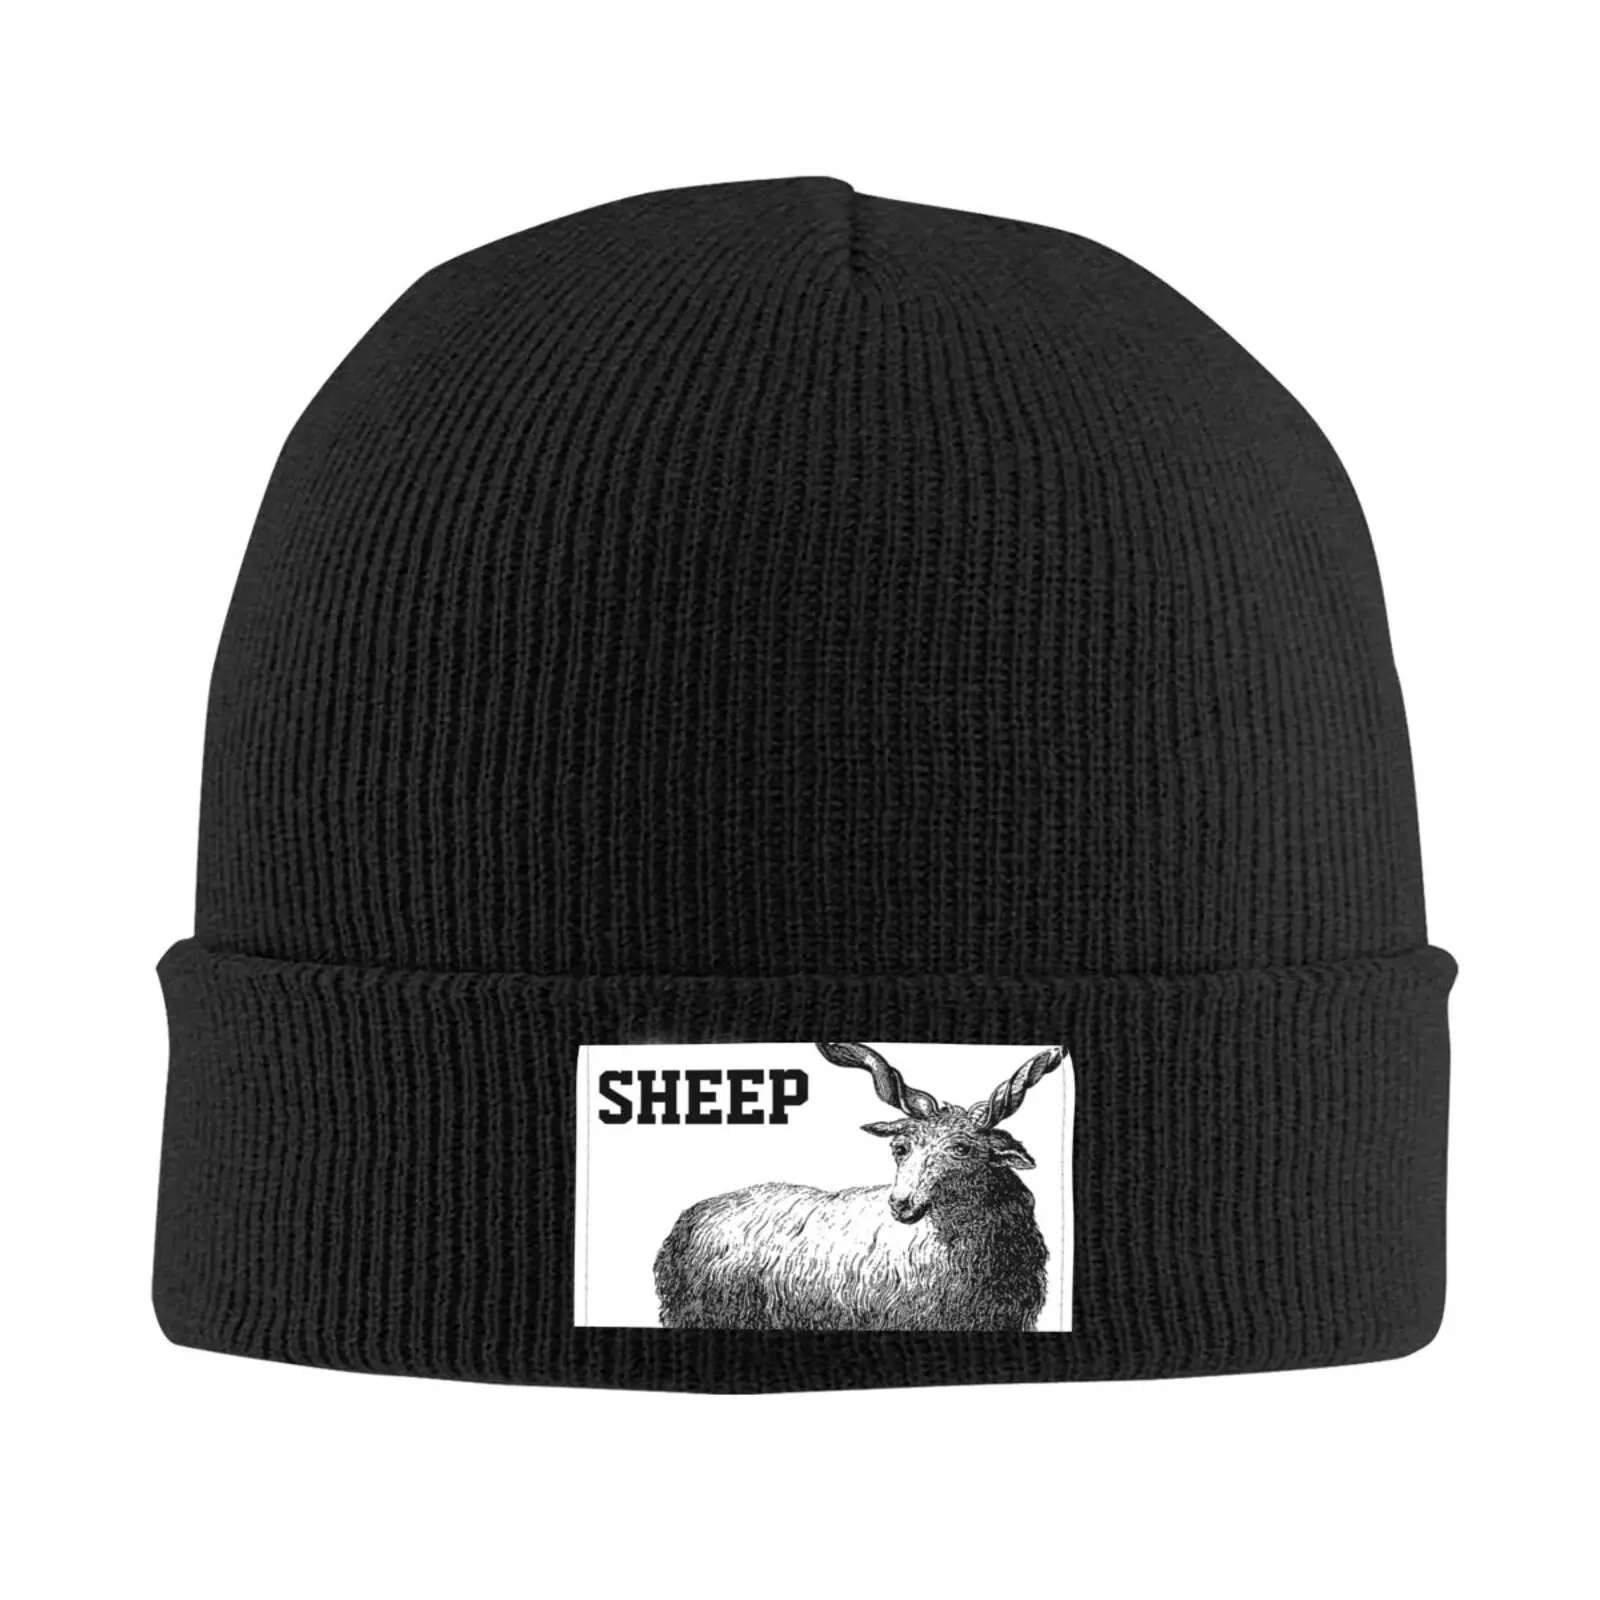 New In Beanies For Men Cartoon Animal Sheep Embroidery Women'S Winter Hat Outdoor Soft Warm Ski Caps Skullies Knitted Y2k